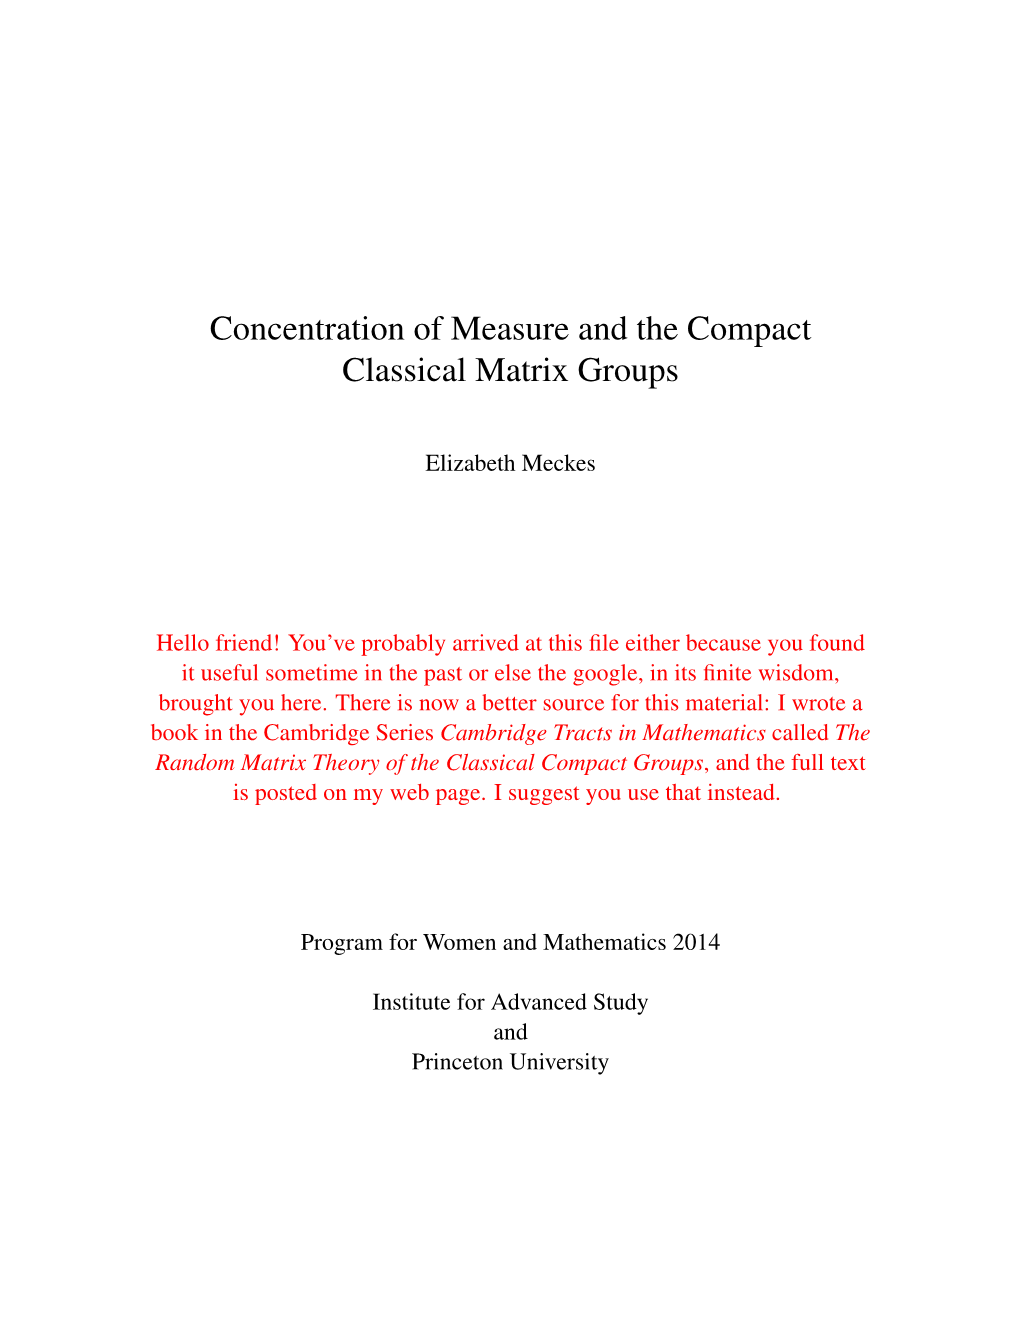 Concentration of Measure and the Compact Classical Matrix Groups